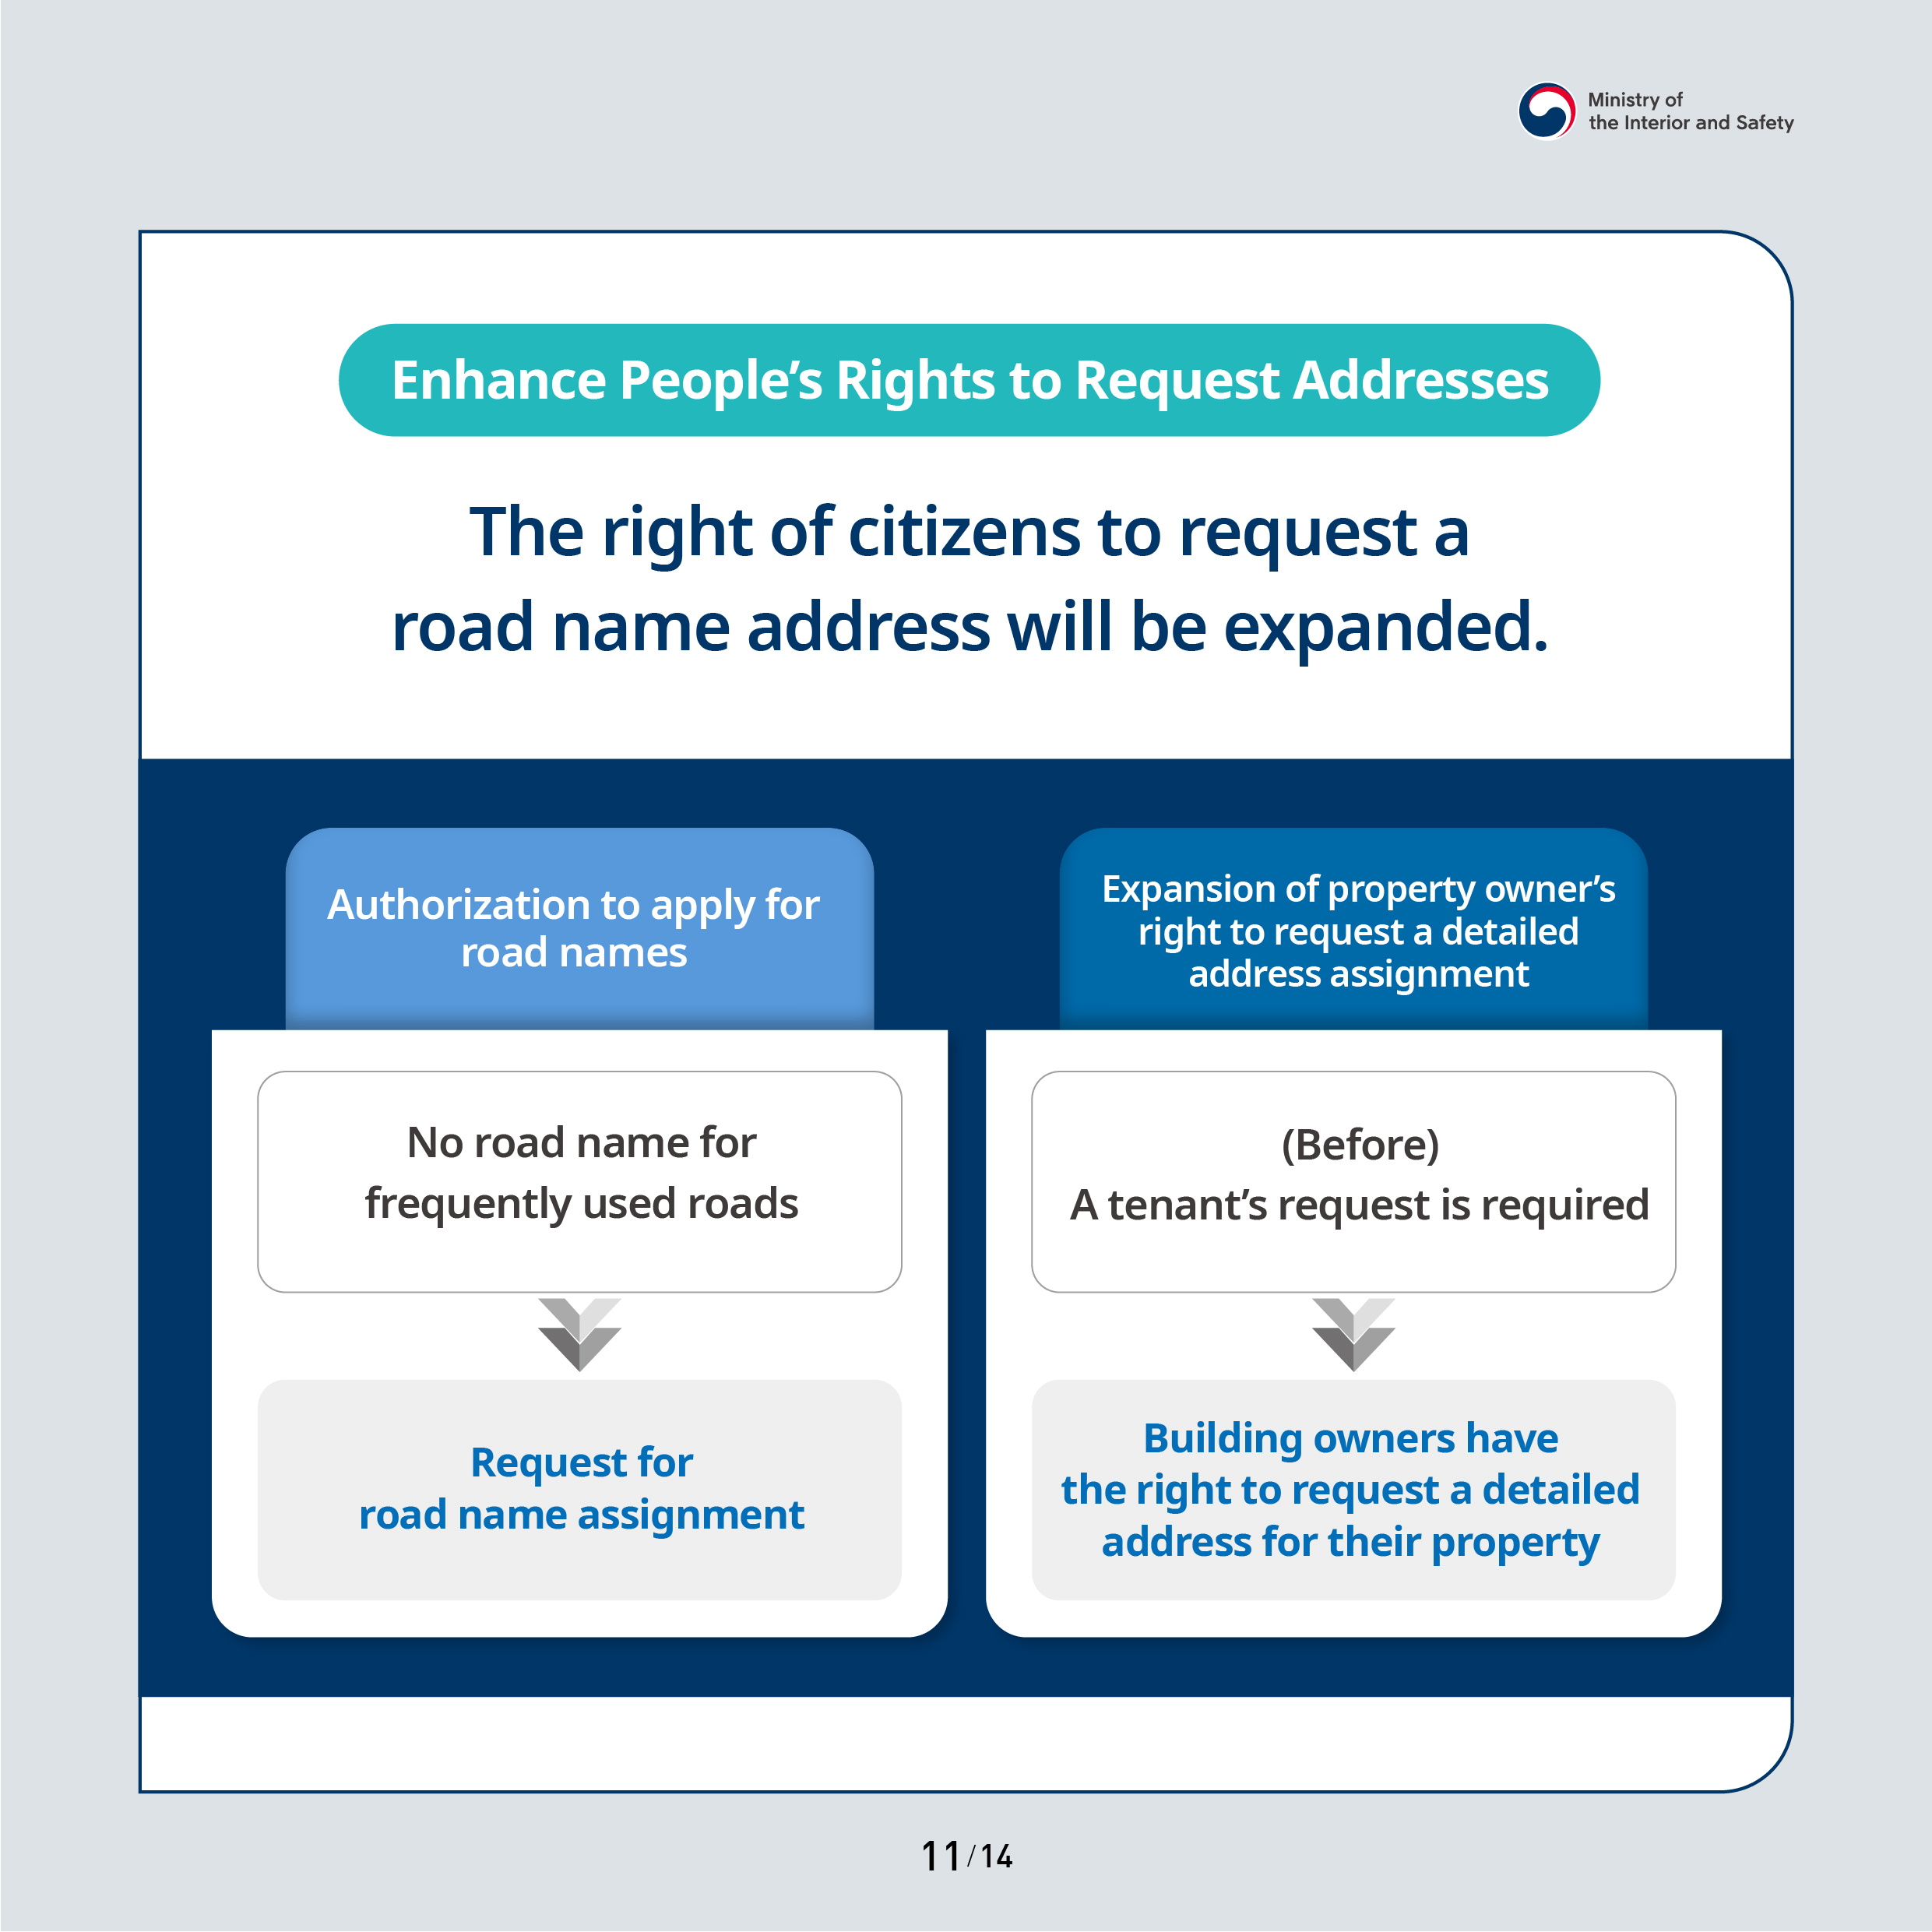 Enhance People's Rights to Request Addresses. The right of citizens to request a road name address will be expanded. Authorization to apply for road names: No road name for frequently used roads > Request for road name assignment. Expansion of property owner's right to request a detailed address assignment: (Before) A tenant's request is required > Building owners have the right to request a detailed address for their property.